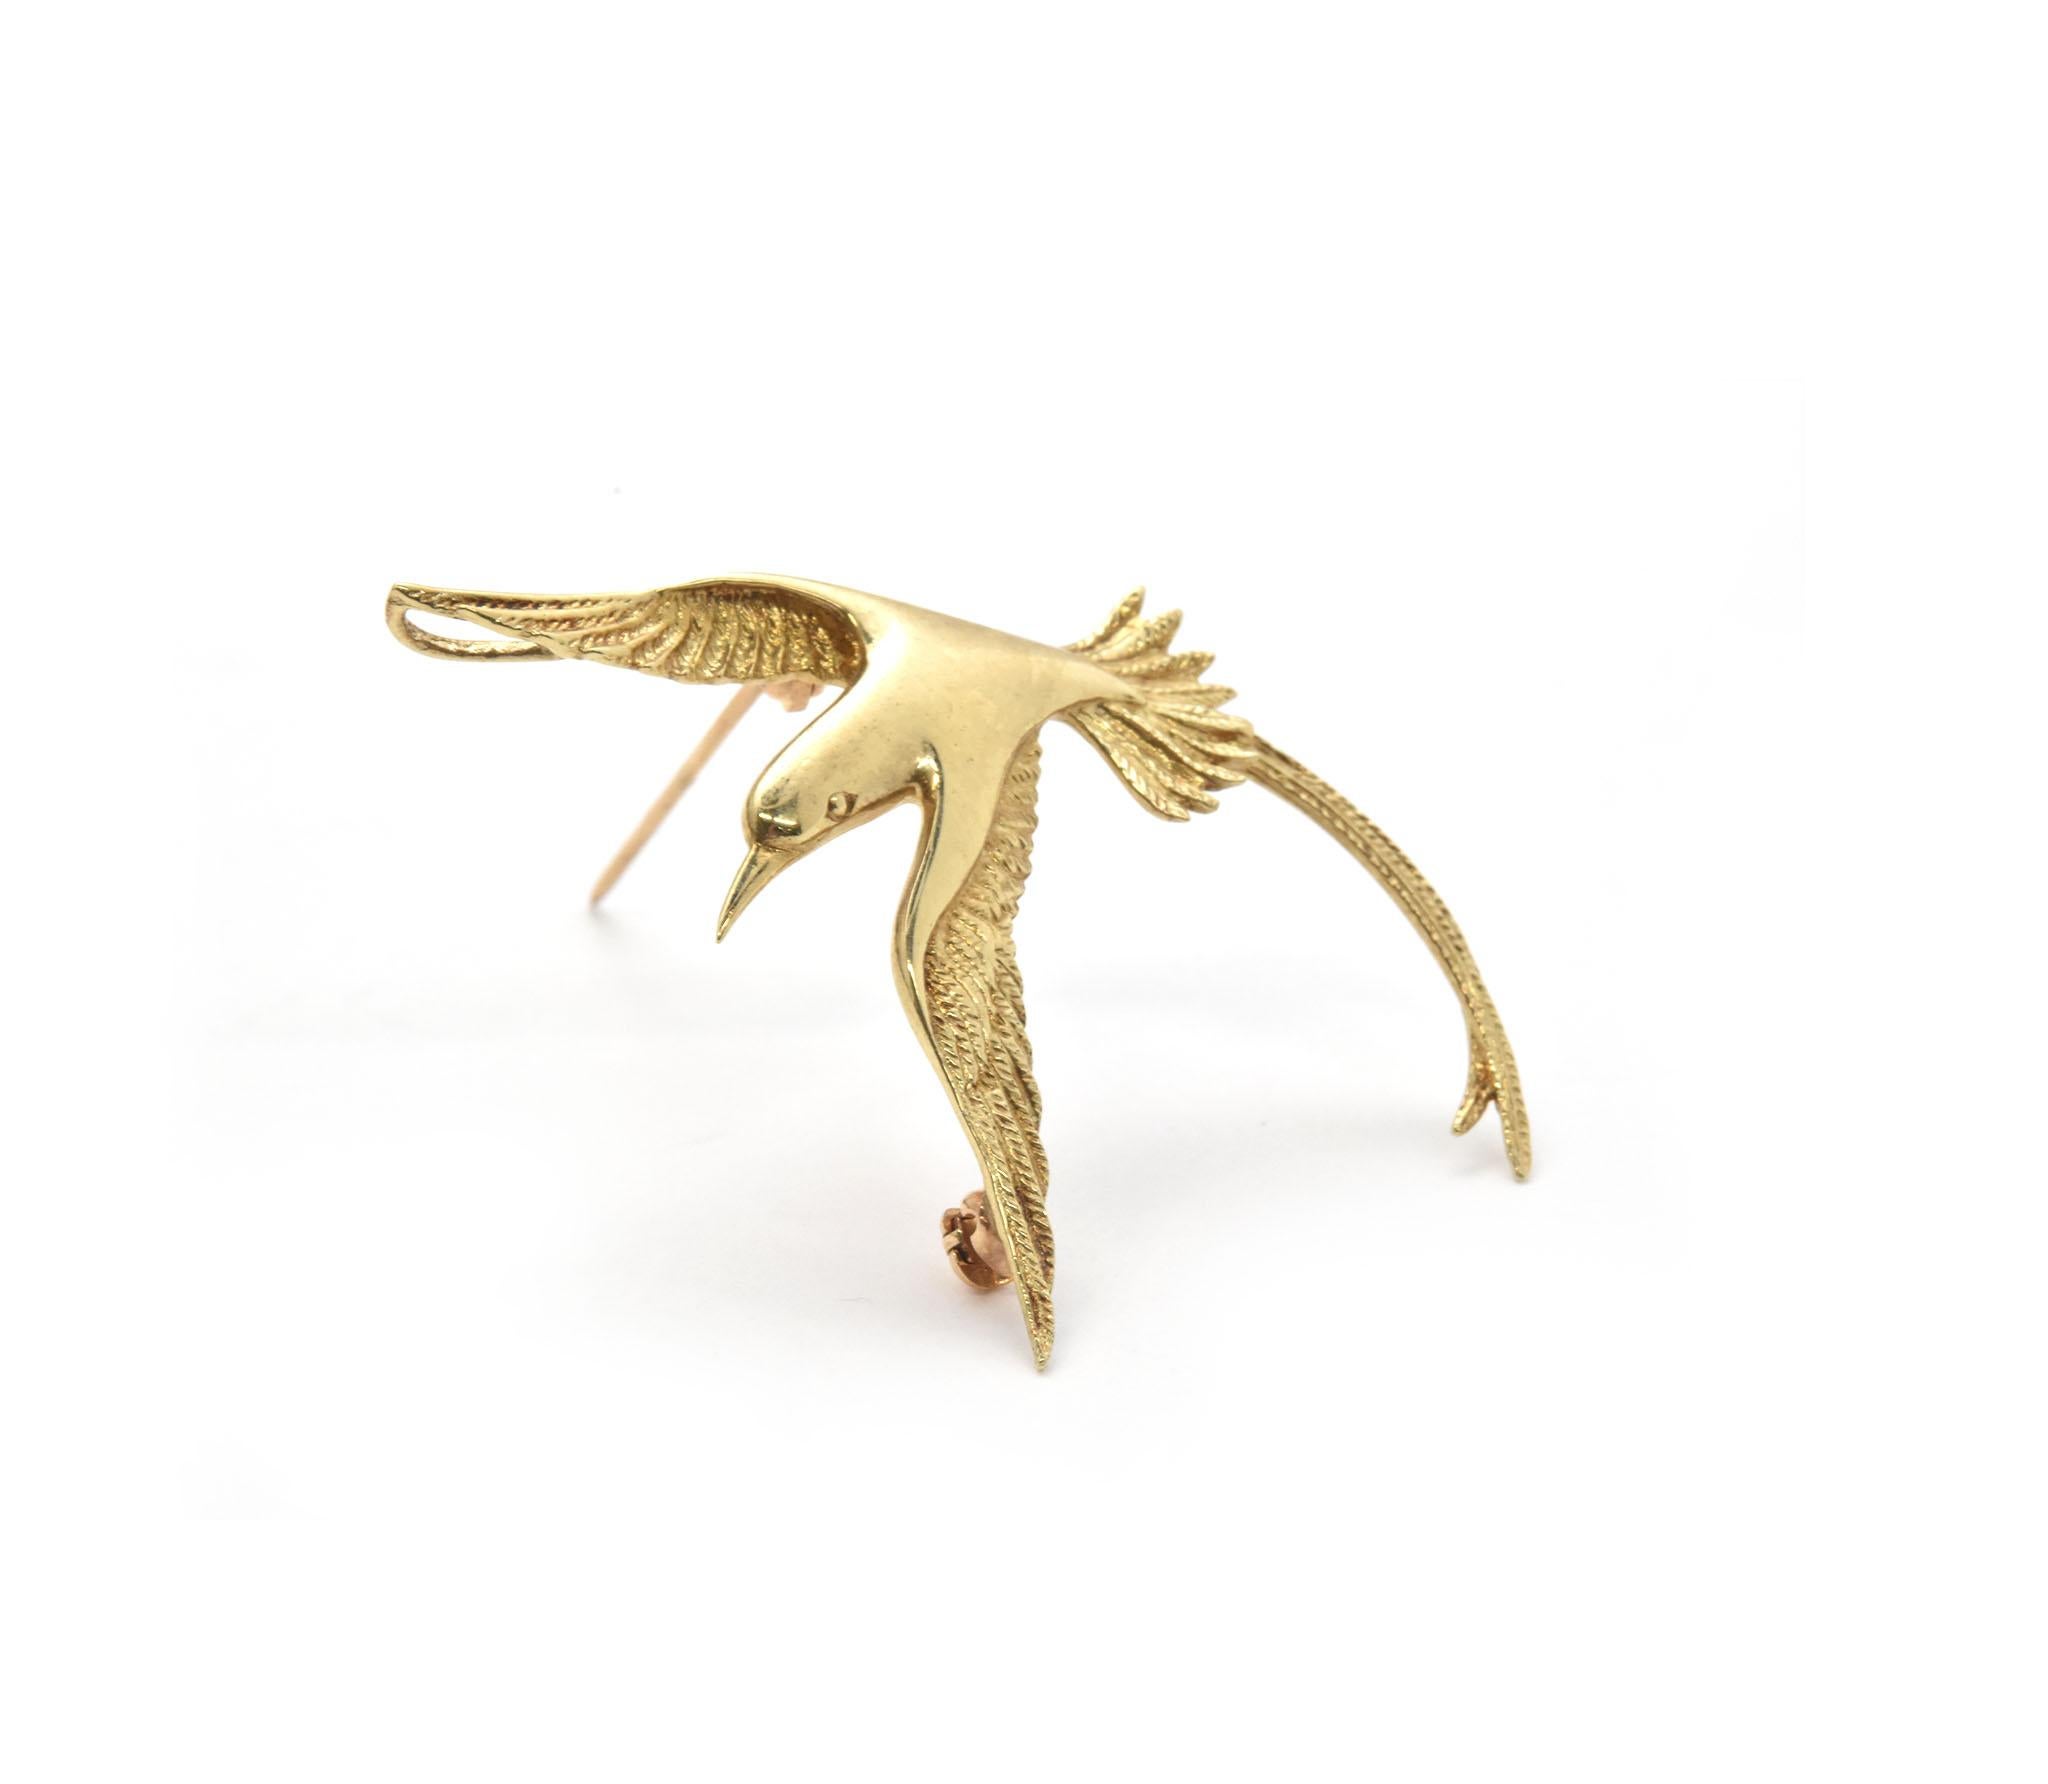 This bird pin is made in 14k yellow gold. It measures 46x34mm, and it weighs 3.5 grams.